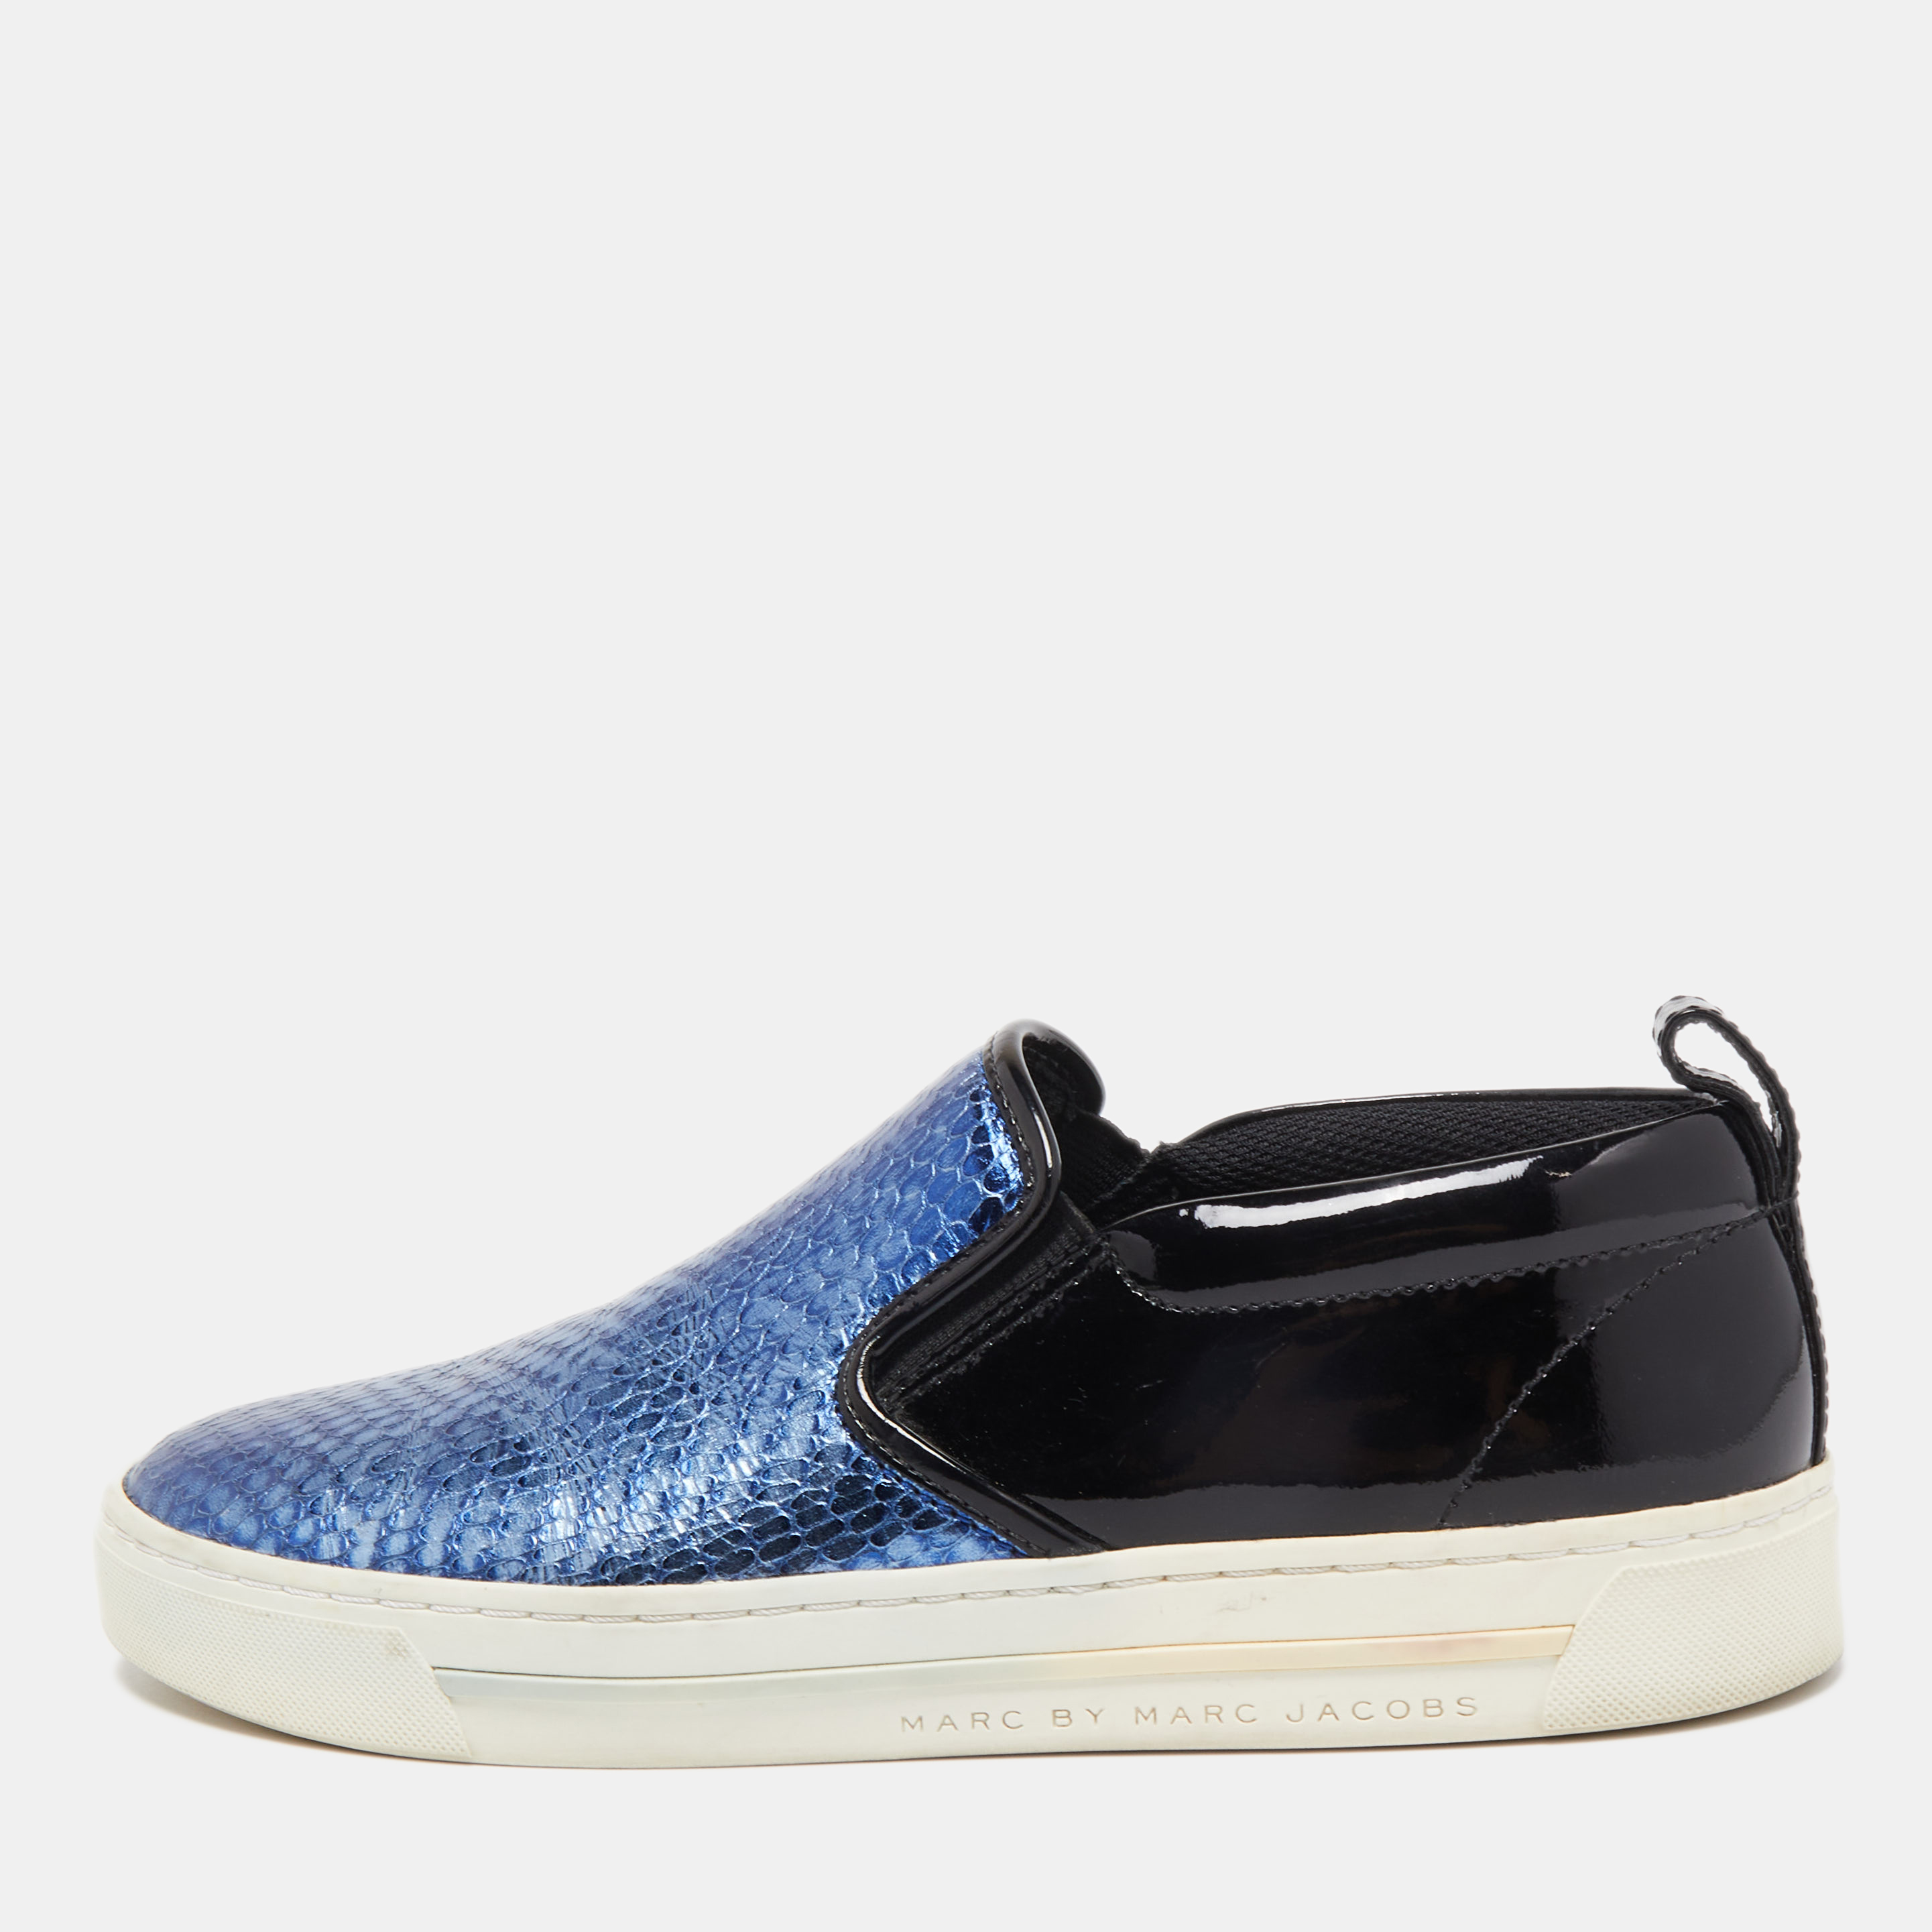 Marc By Marc Jacobs Blue/Black Patent And Python Embossed Leather Broome Sneakers Size 36